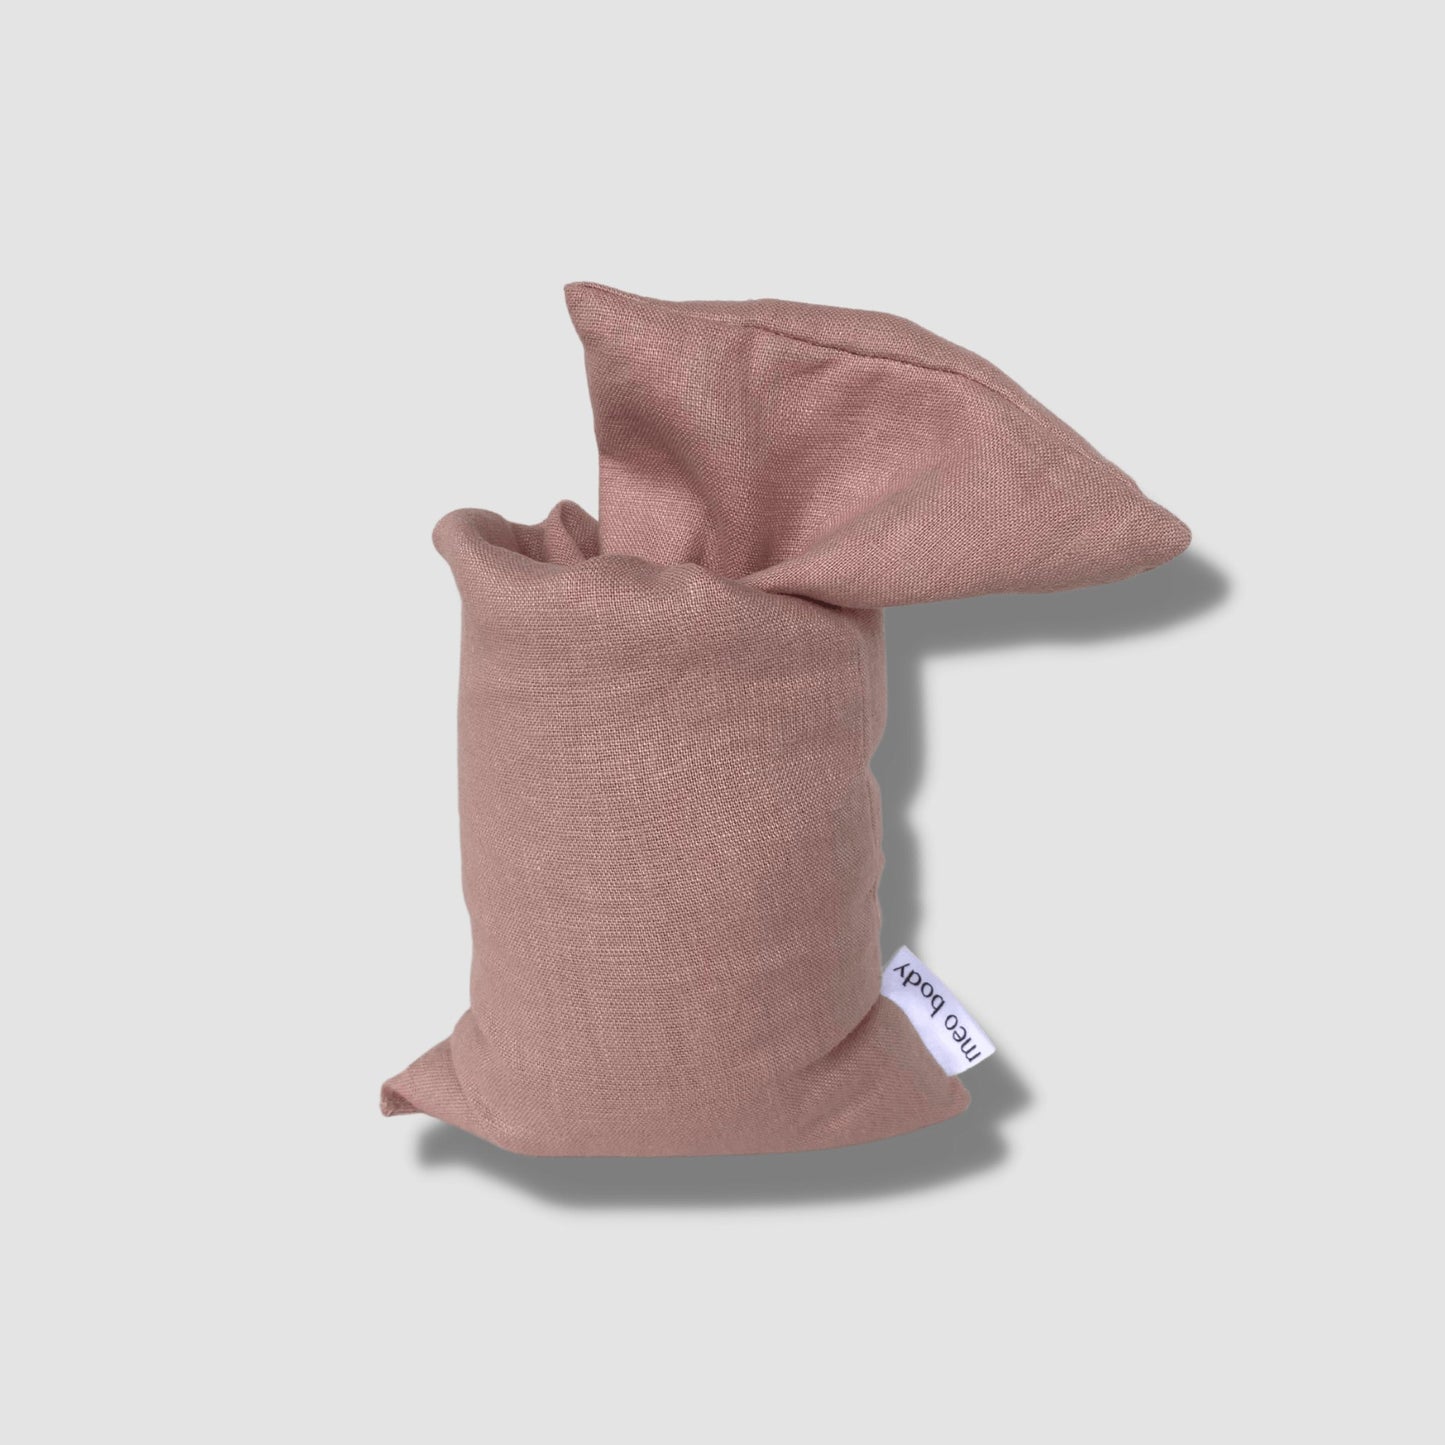 Hand-crafted Wheat Heat Pack, 'Pink' design - Meo Body